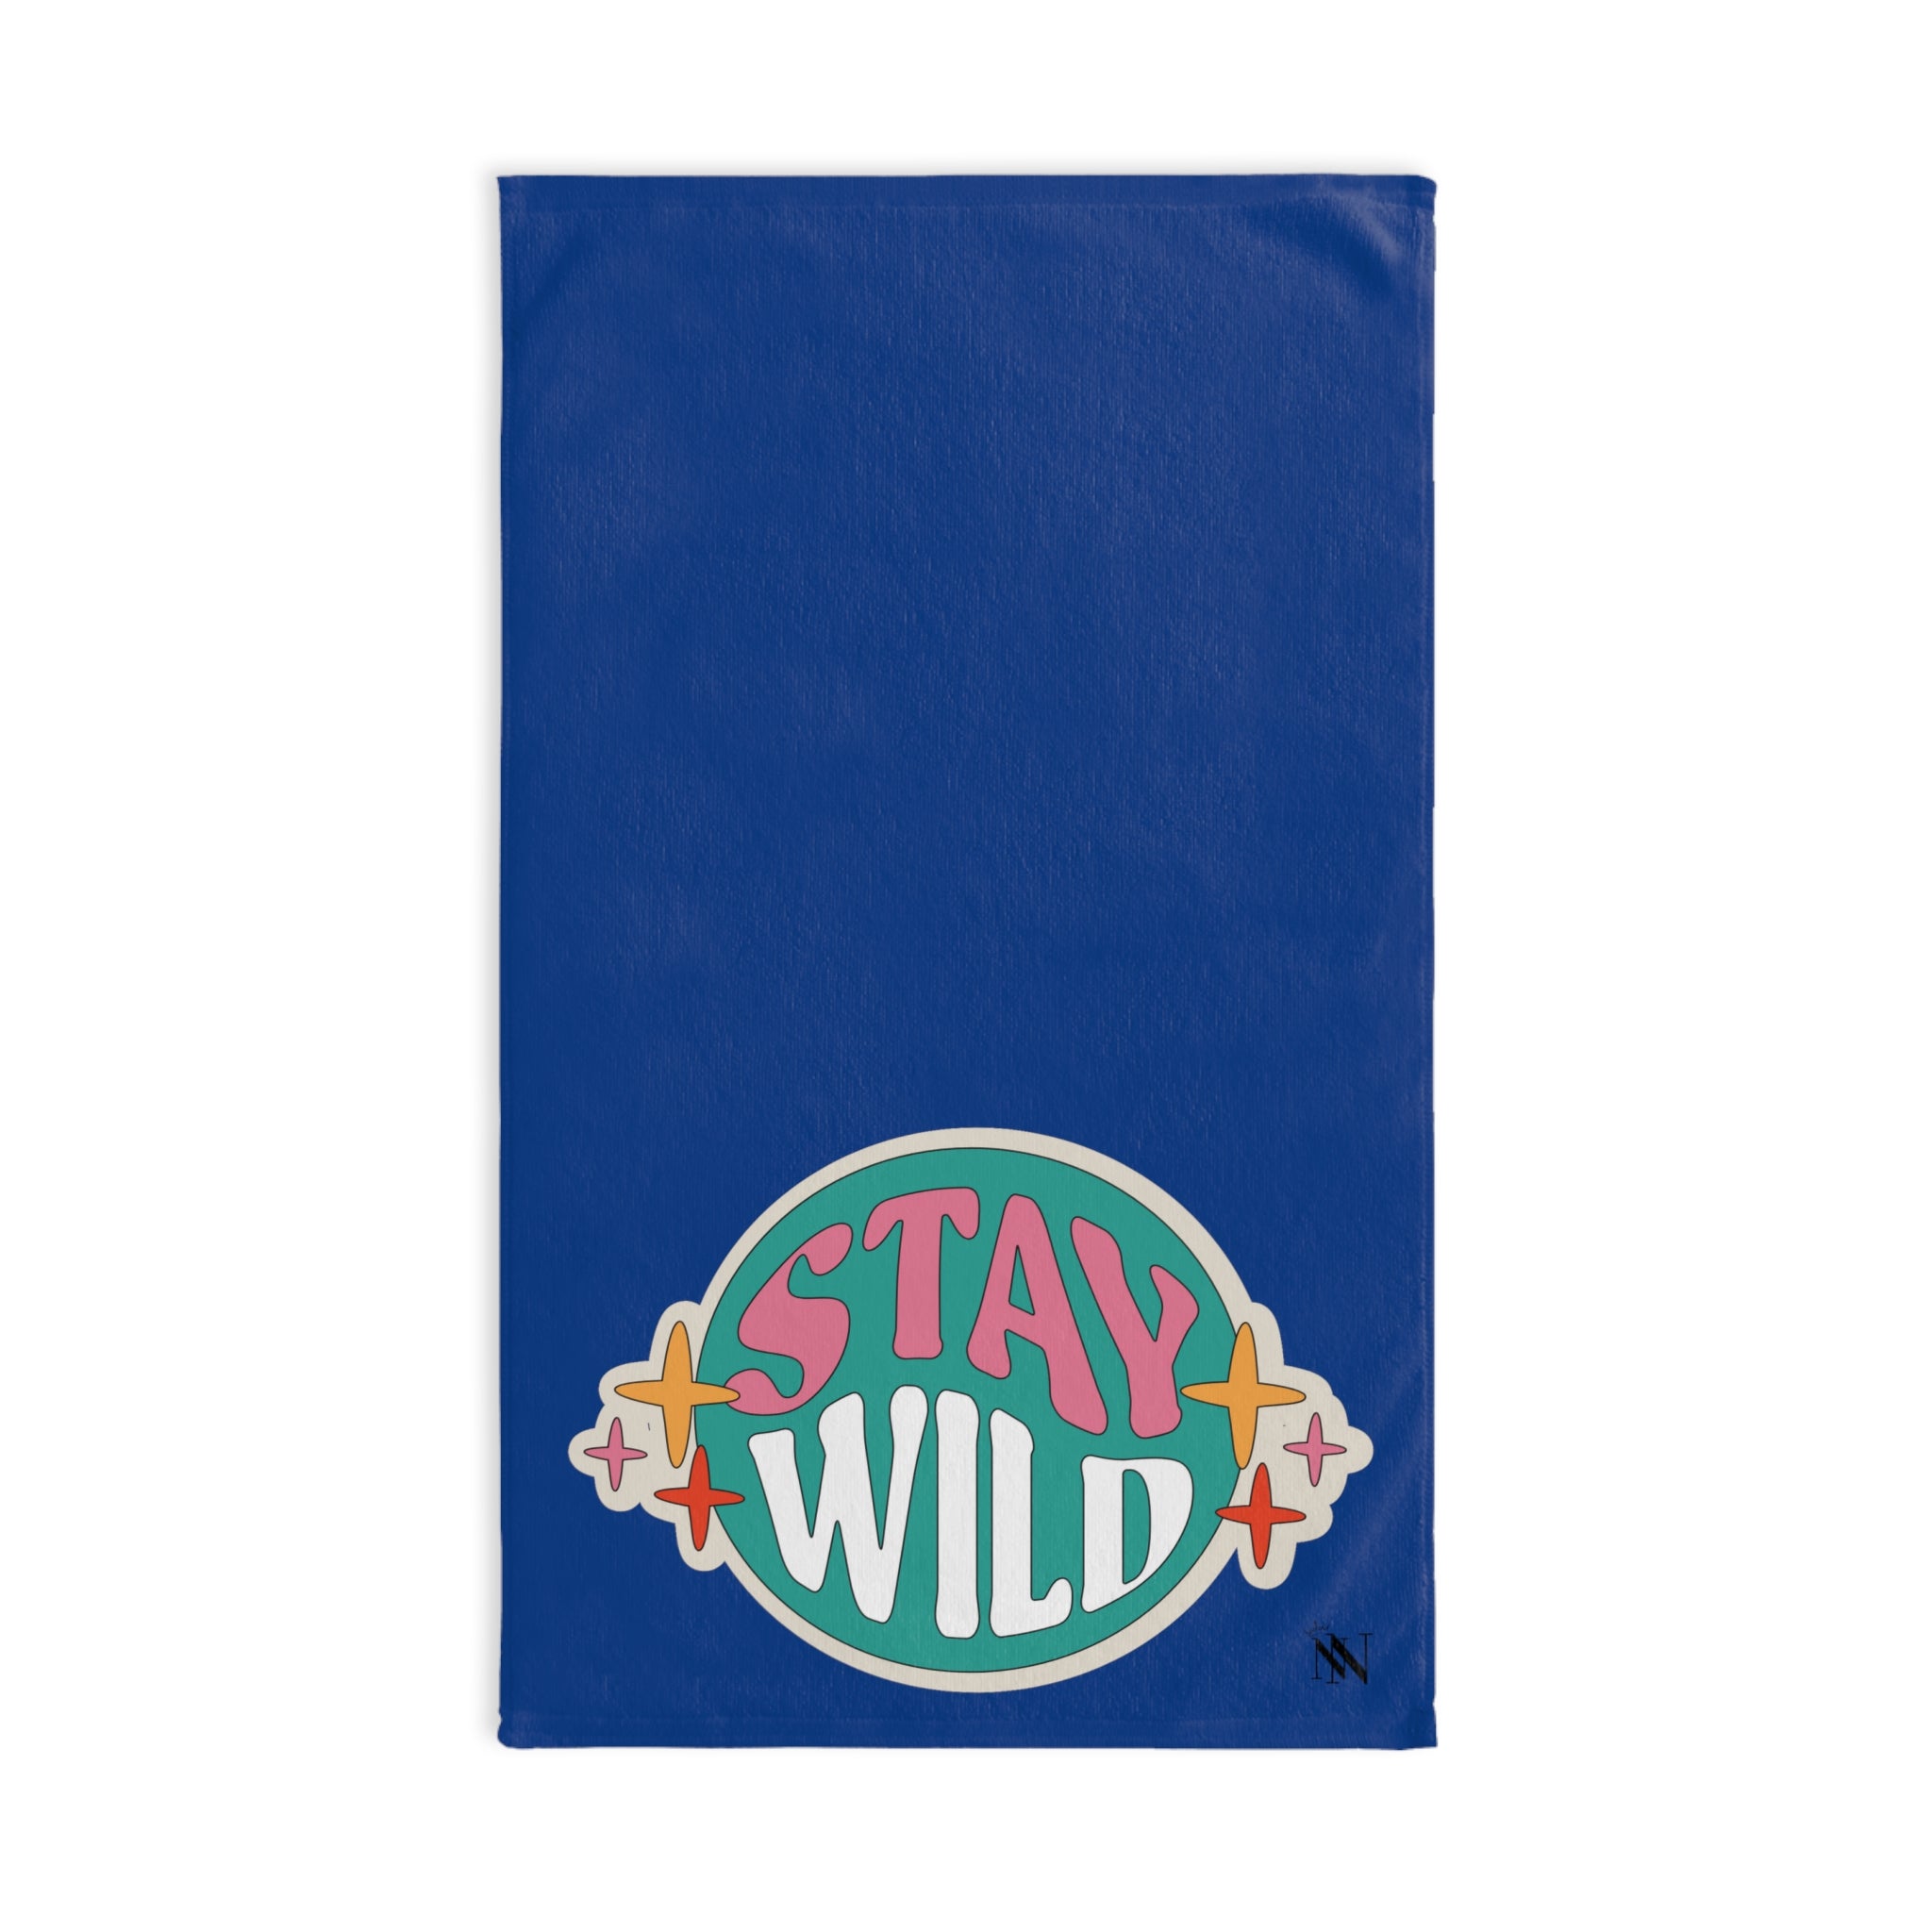 Stay Wild Boho Retro Blue | Gifts for Boyfriend, Funny Towel Romantic Gift for Wedding Couple Fiance First Year Anniversary Valentines, Party Gag Gifts, Joke Humor Cloth for Husband Men BF NECTAR NAPKINS